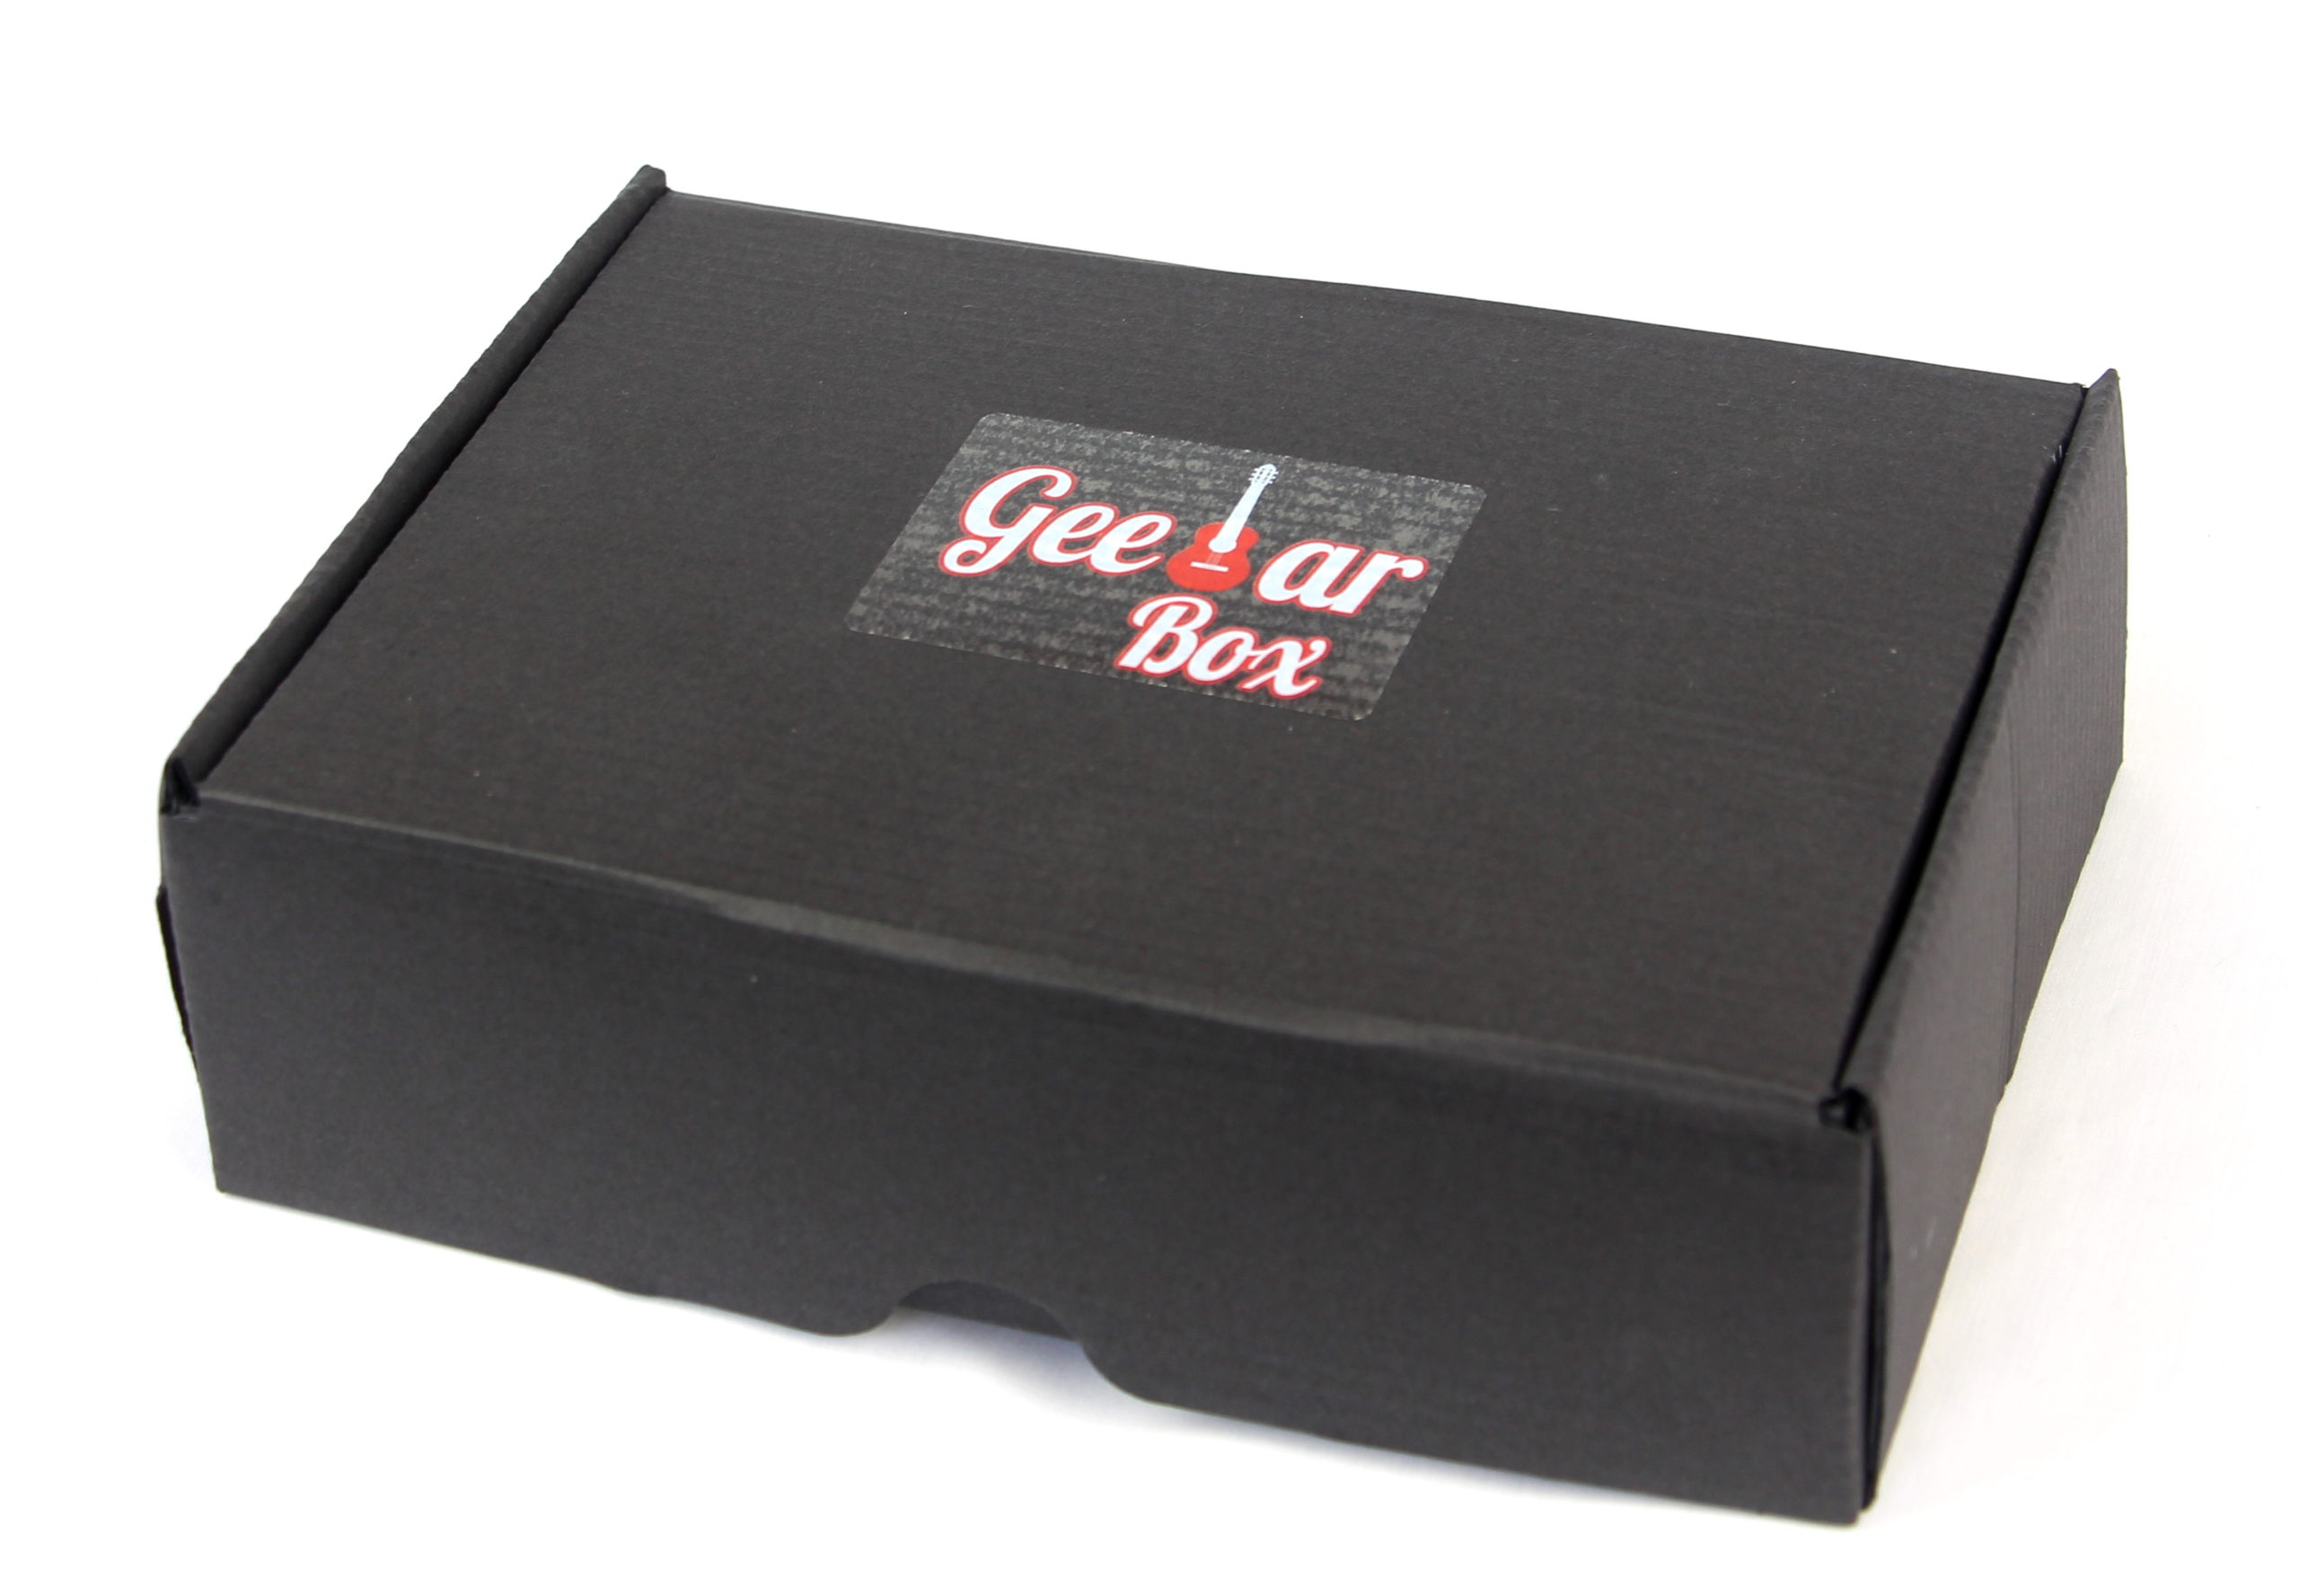 Geetar Box The perfect Gift for a Guitarist